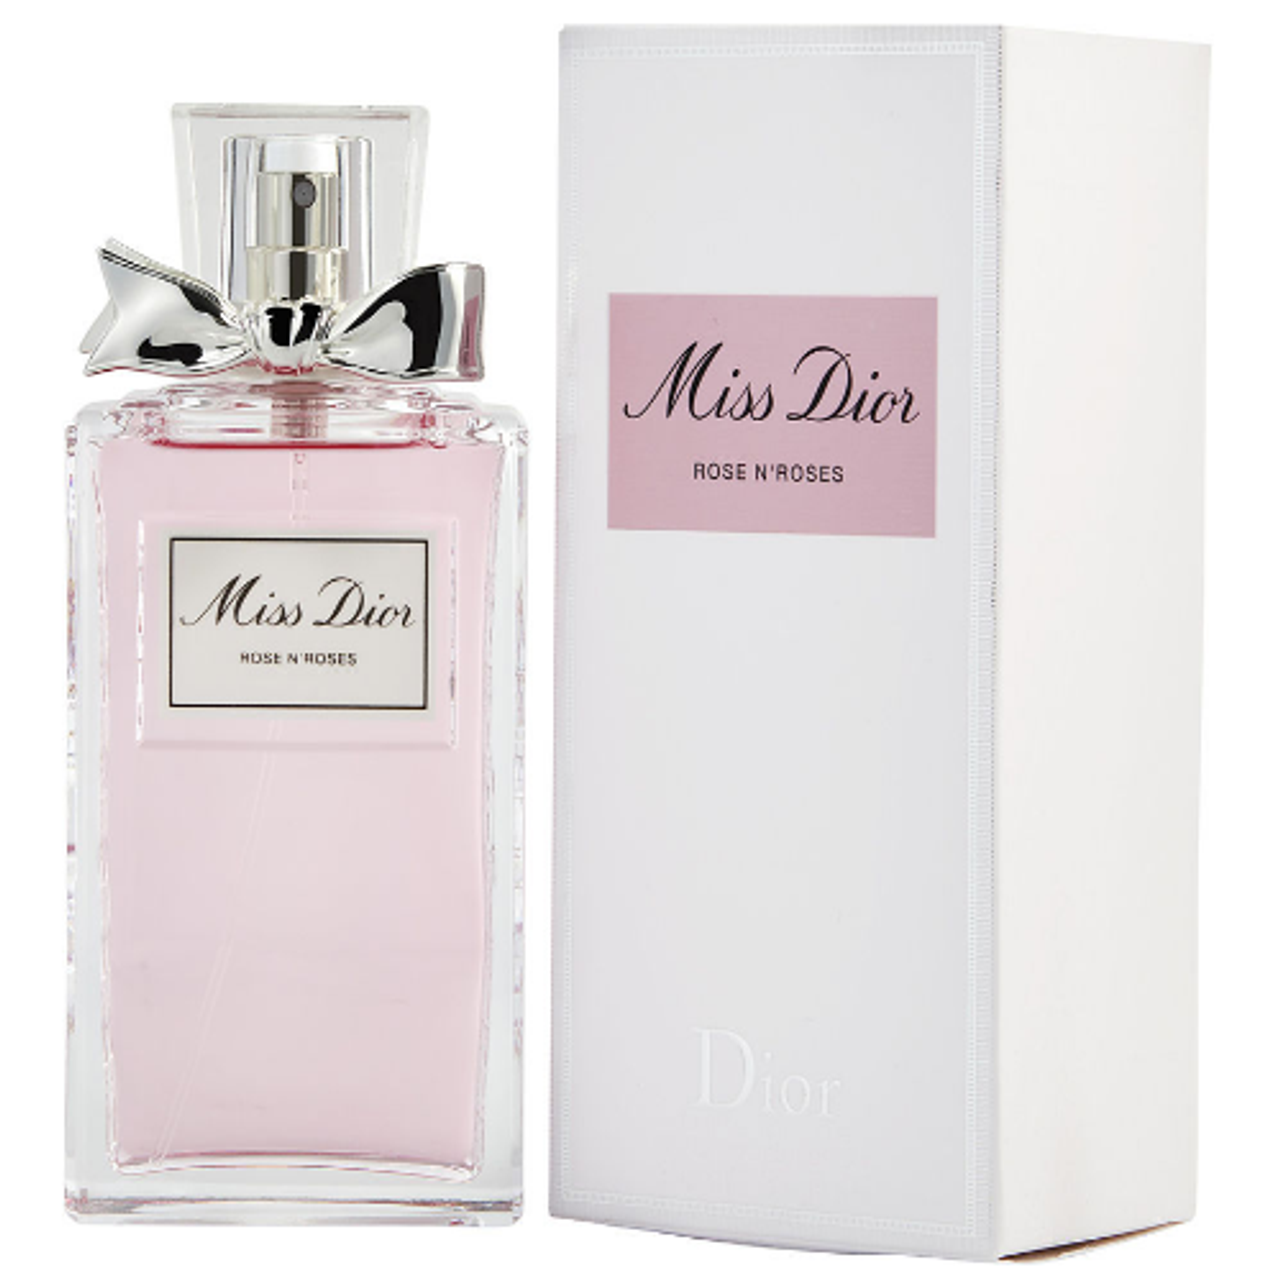 Miss Dior Rose N'Roses By Christian Dior Perfume Sample & Subscription